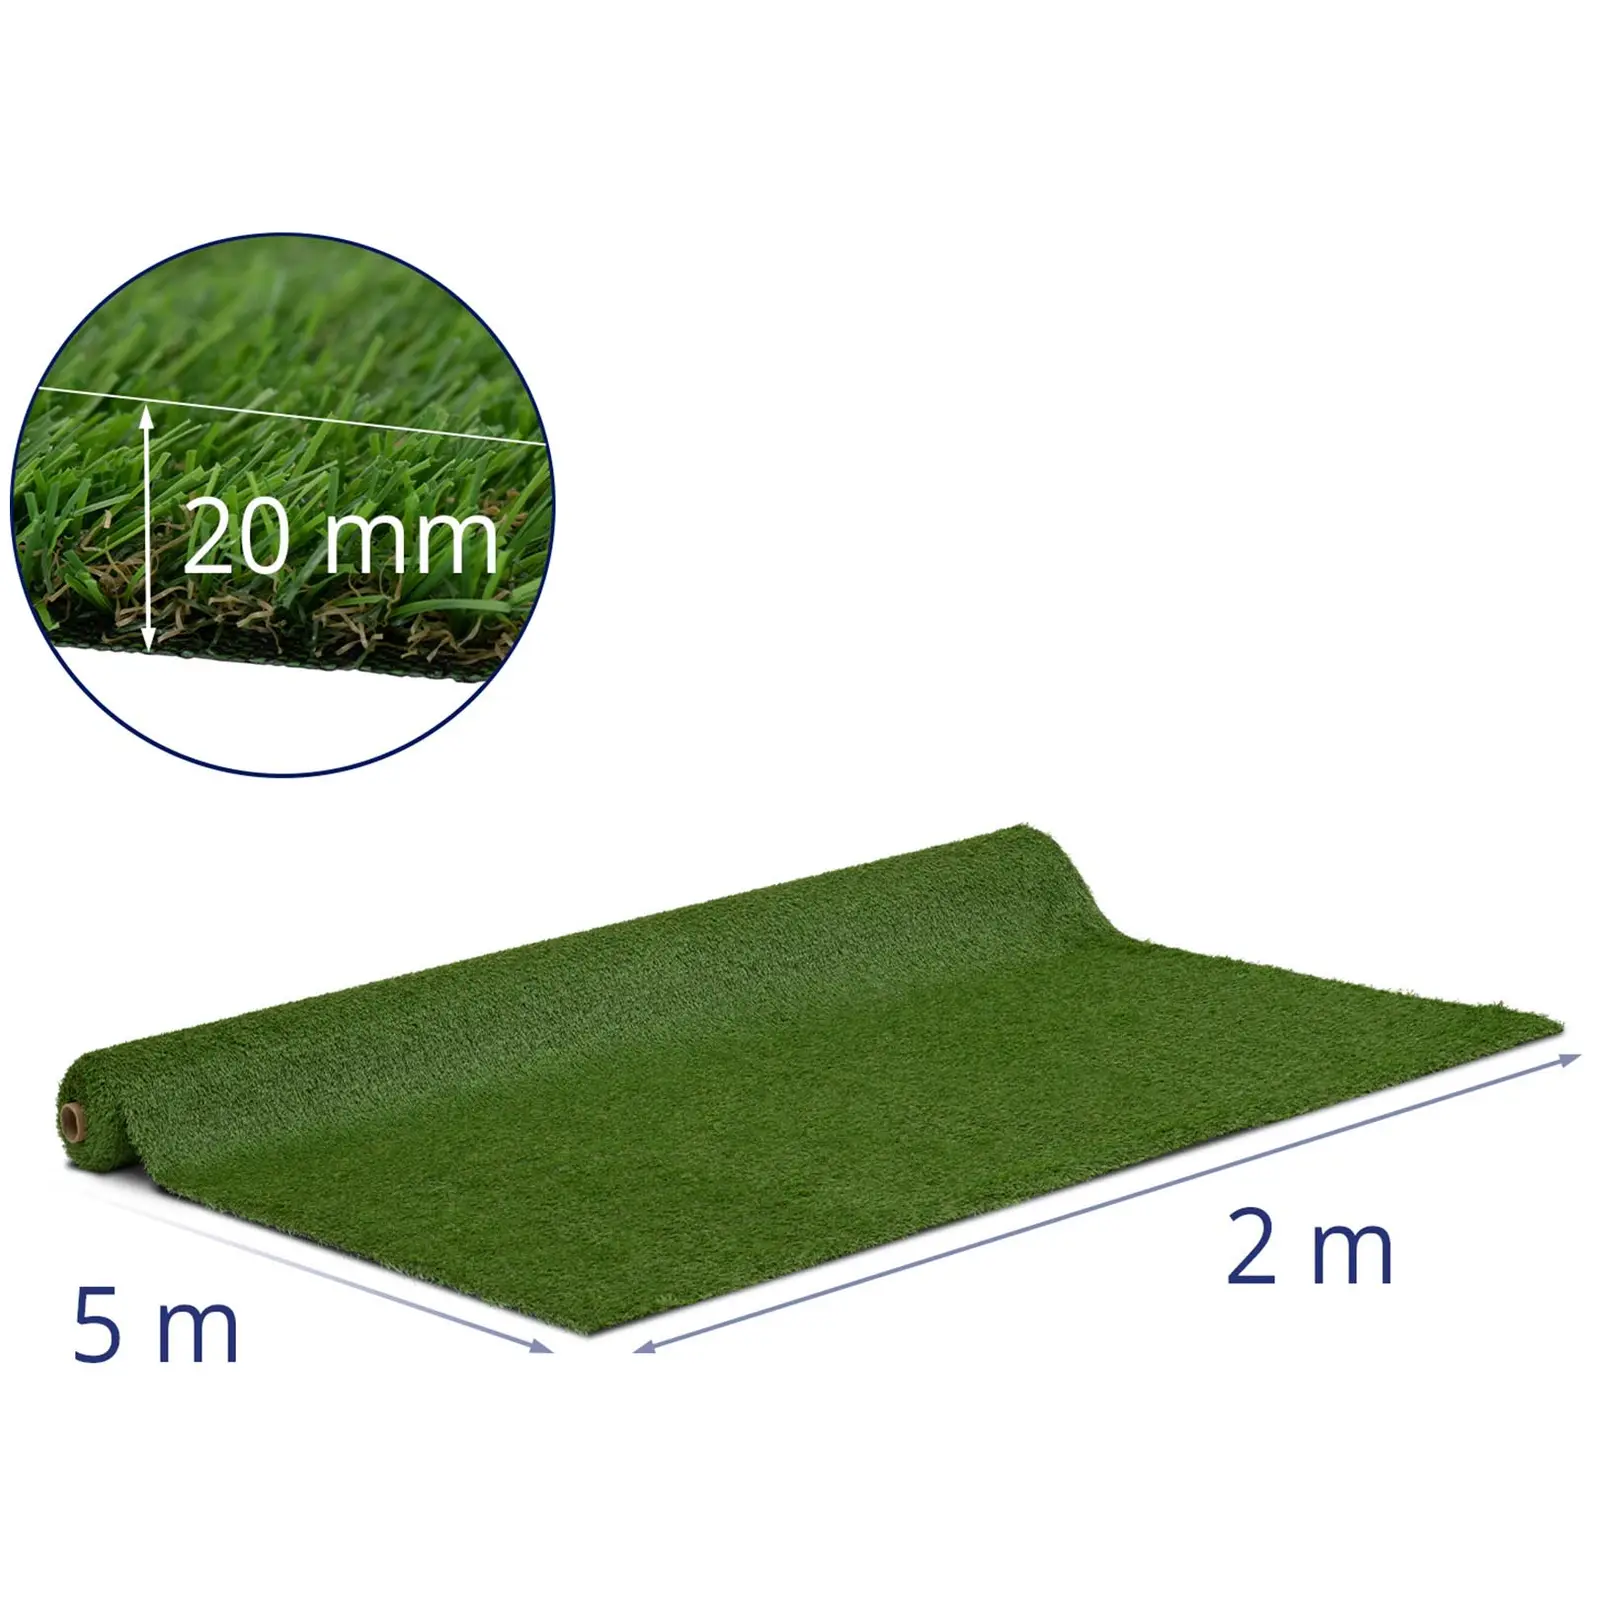 Artificial grass - 200 x 500 cm - Height: 20 mm - Stitch rate: 13/10 cm - UV-resistant